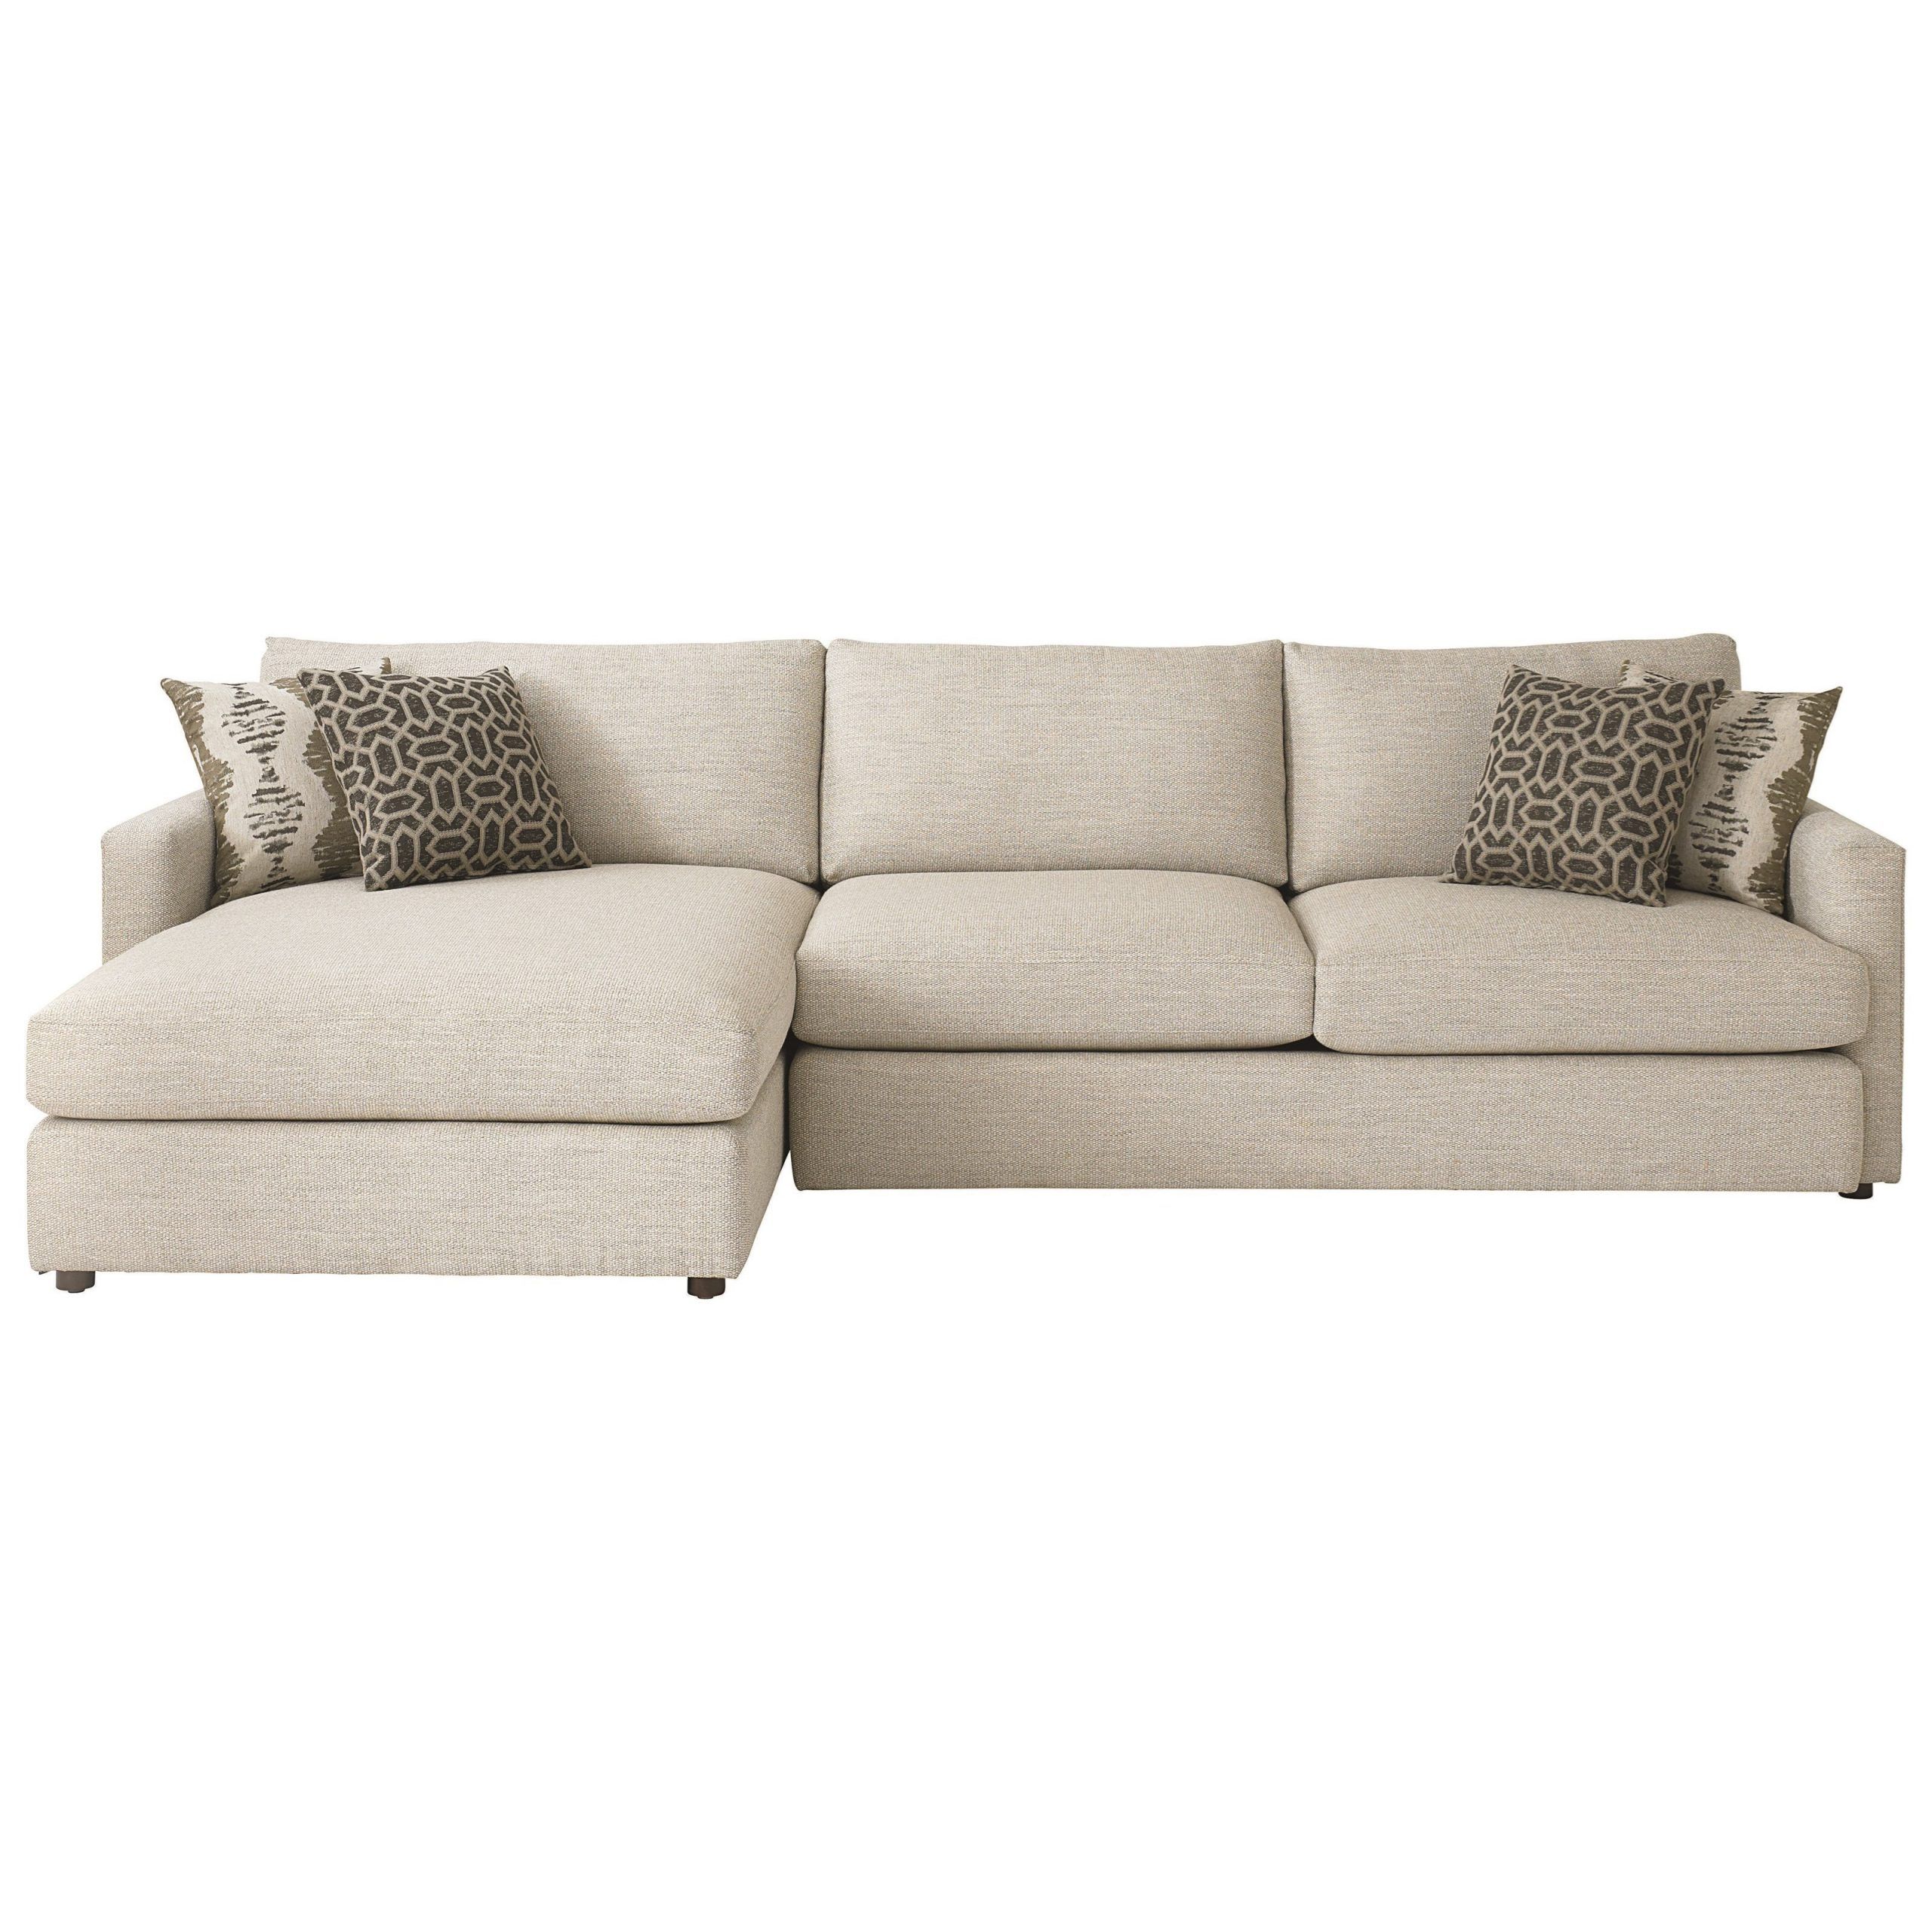 Bassett Allure Contemporary Sectional With Left Arm Facing Regarding Hannah Left Sectional Sofas (View 12 of 15)